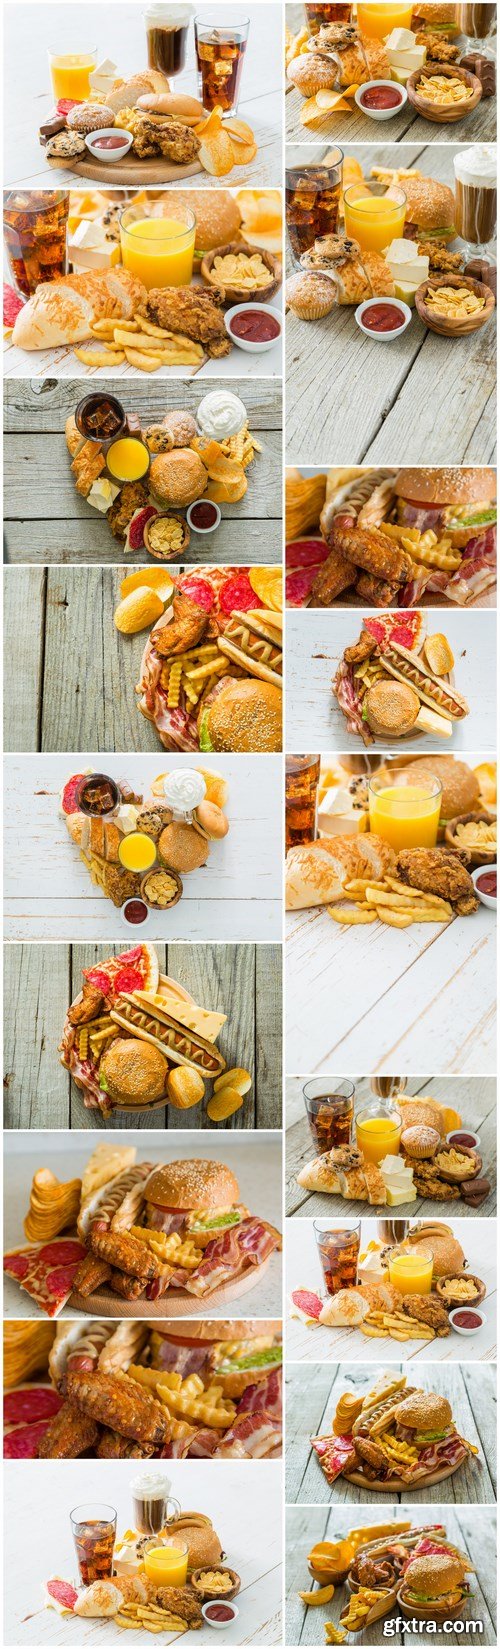 Fast Food Today - Set of 18xUHQ JPEG Professional Stock Images